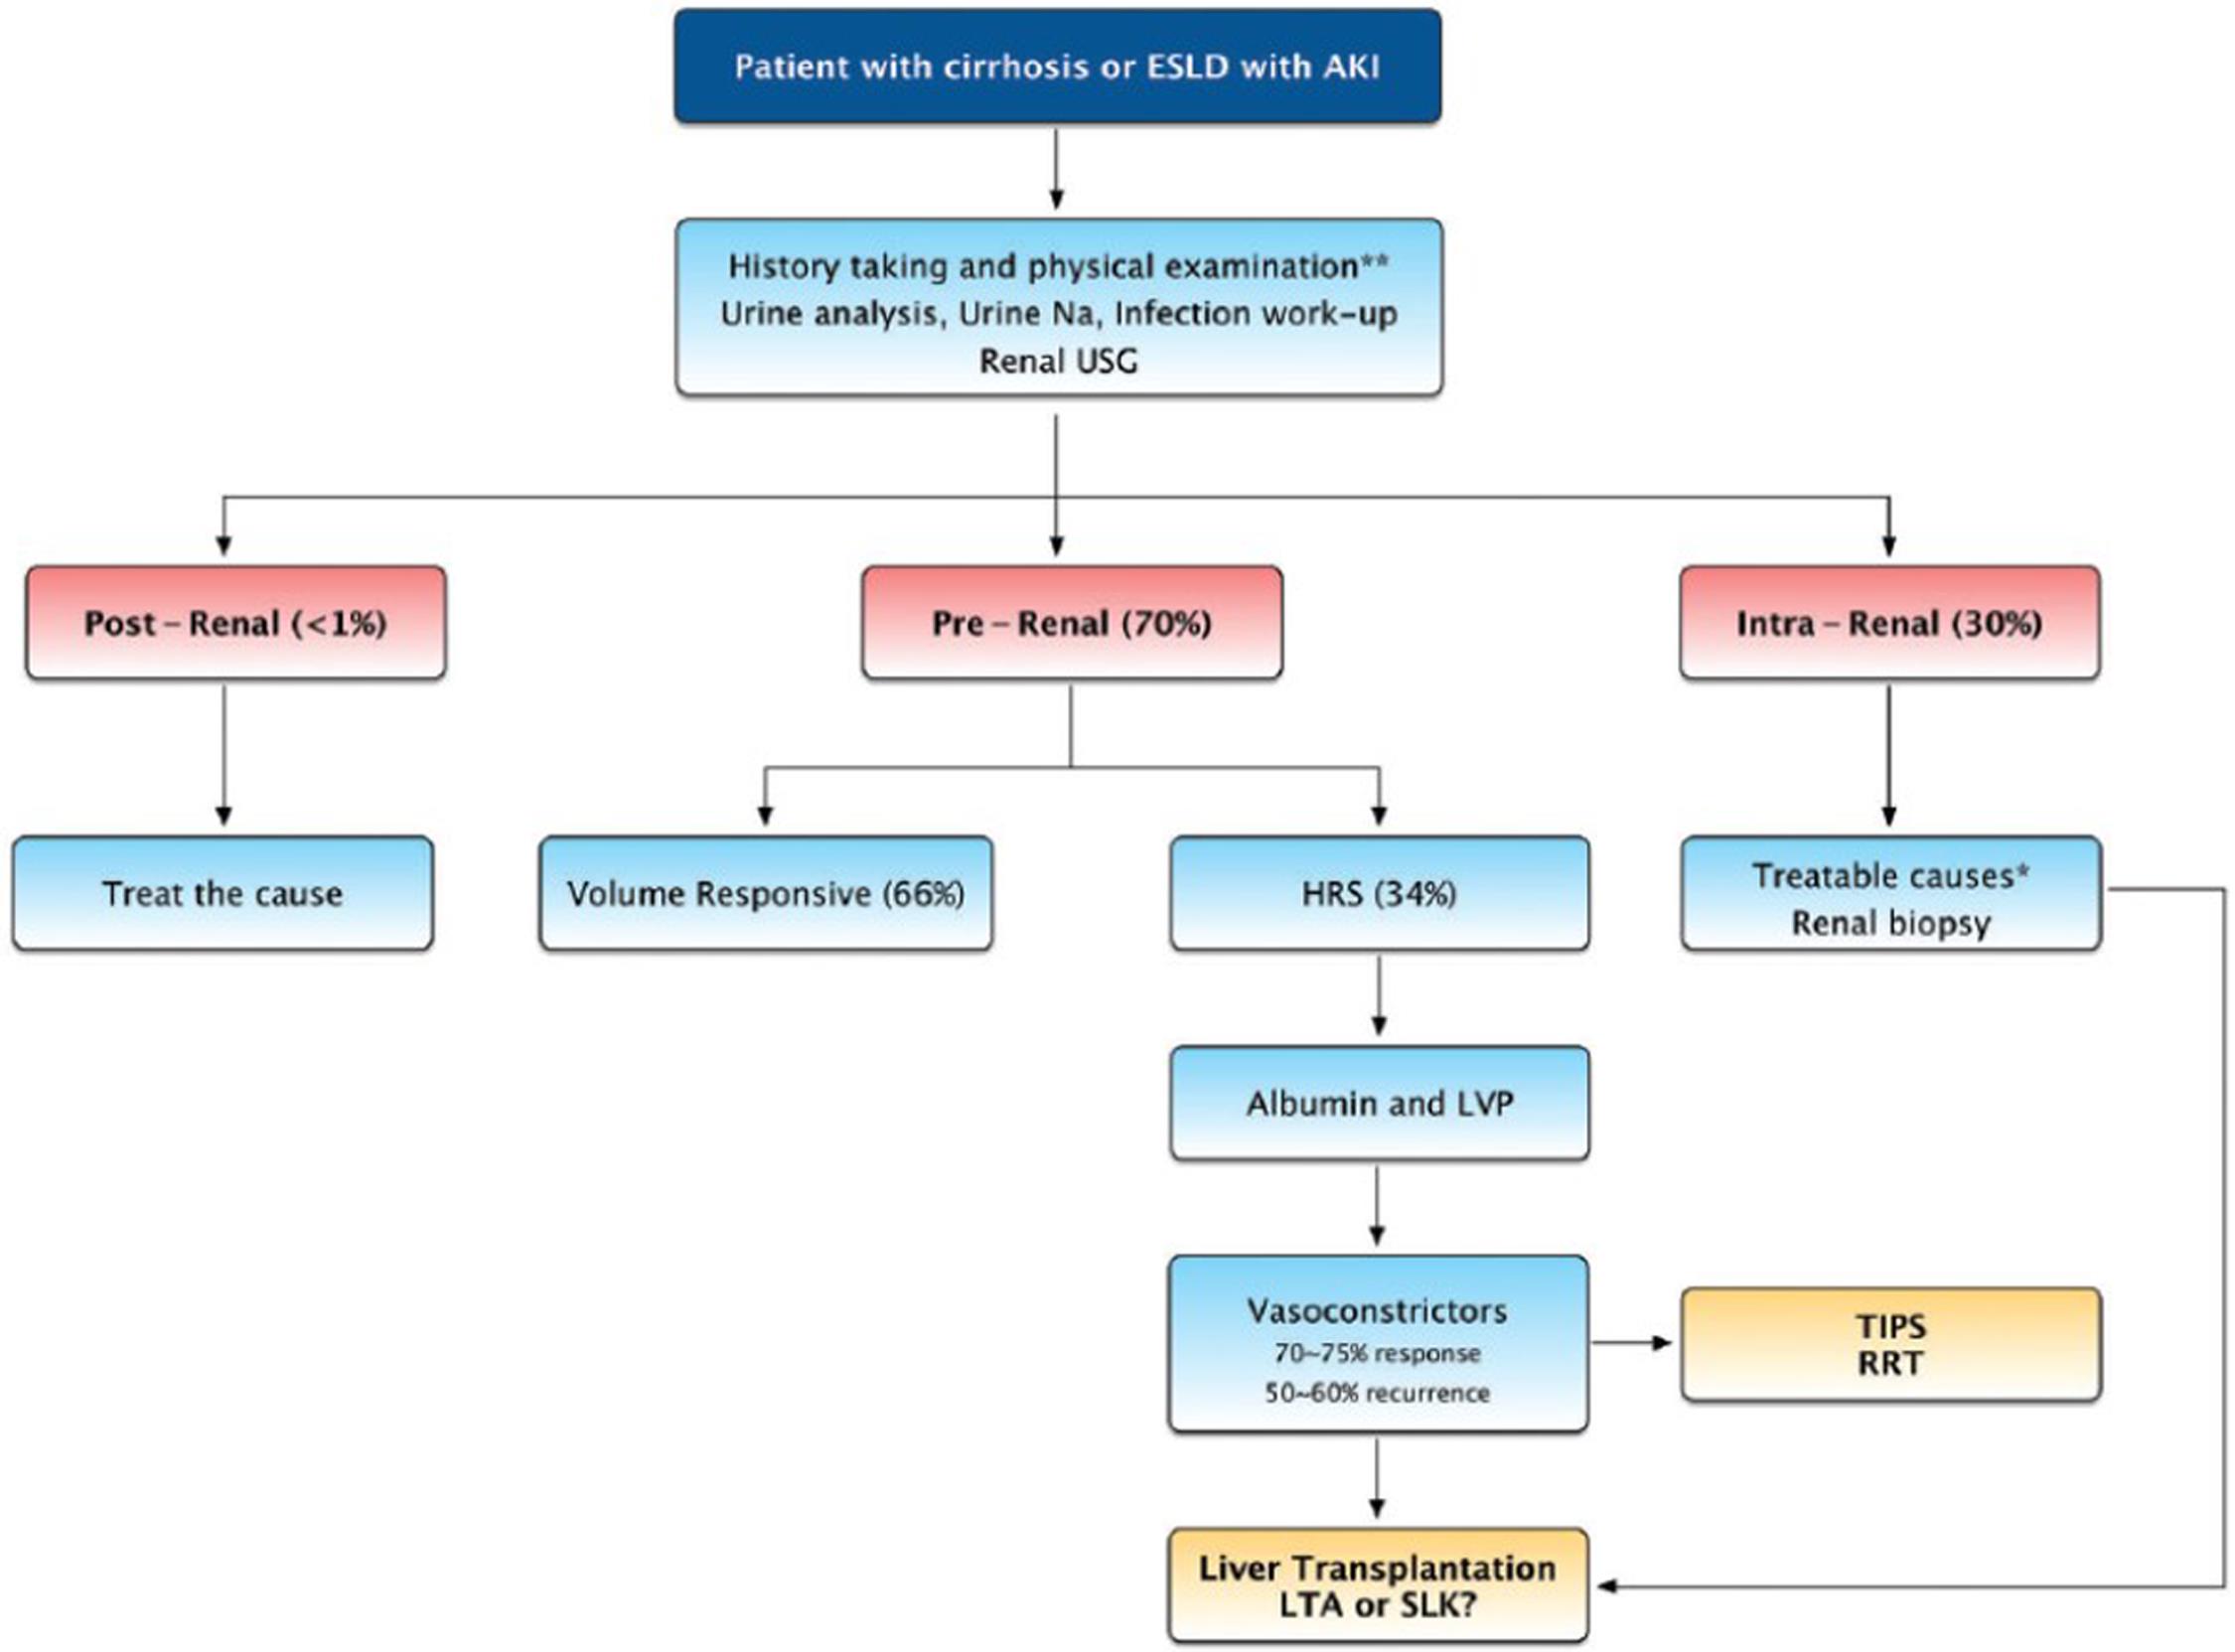 Management approach and algorithm for AKI in patients with cirrhosis.